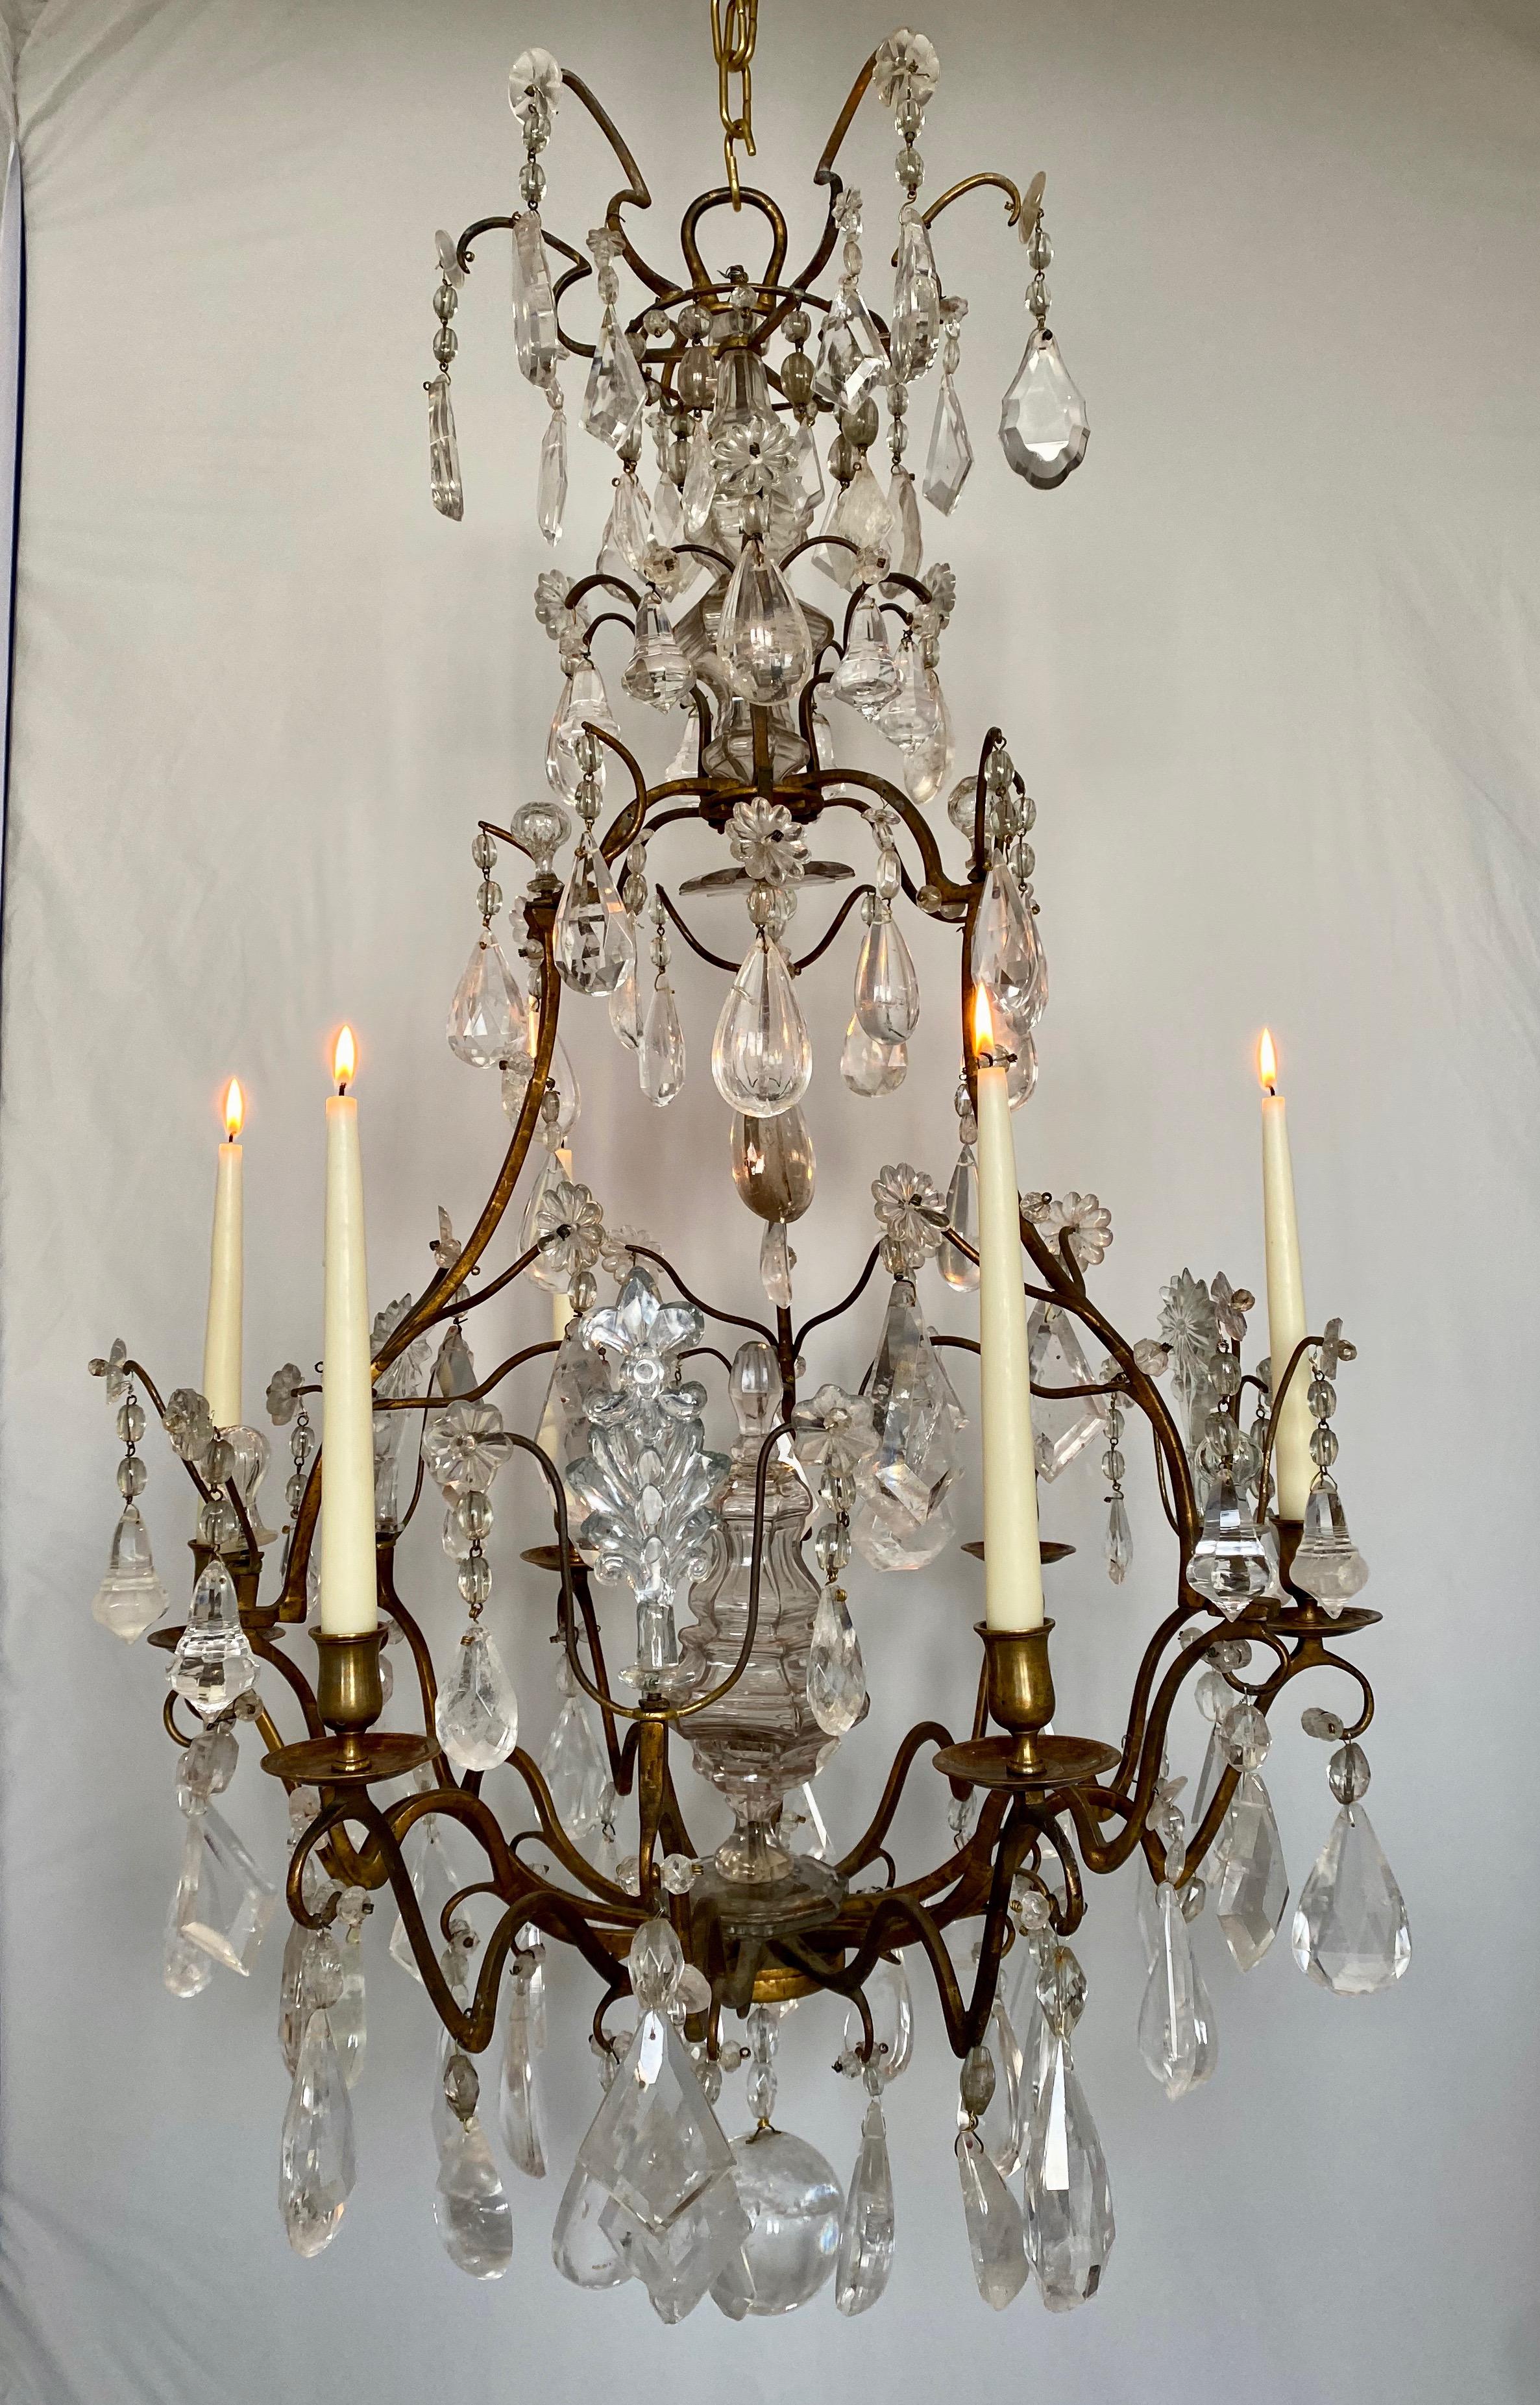 A good looking French chandelier. Pendants of rock crystal and the central parts of blown 18th c glass. Very good patina and fine design. Will look great anywhere.